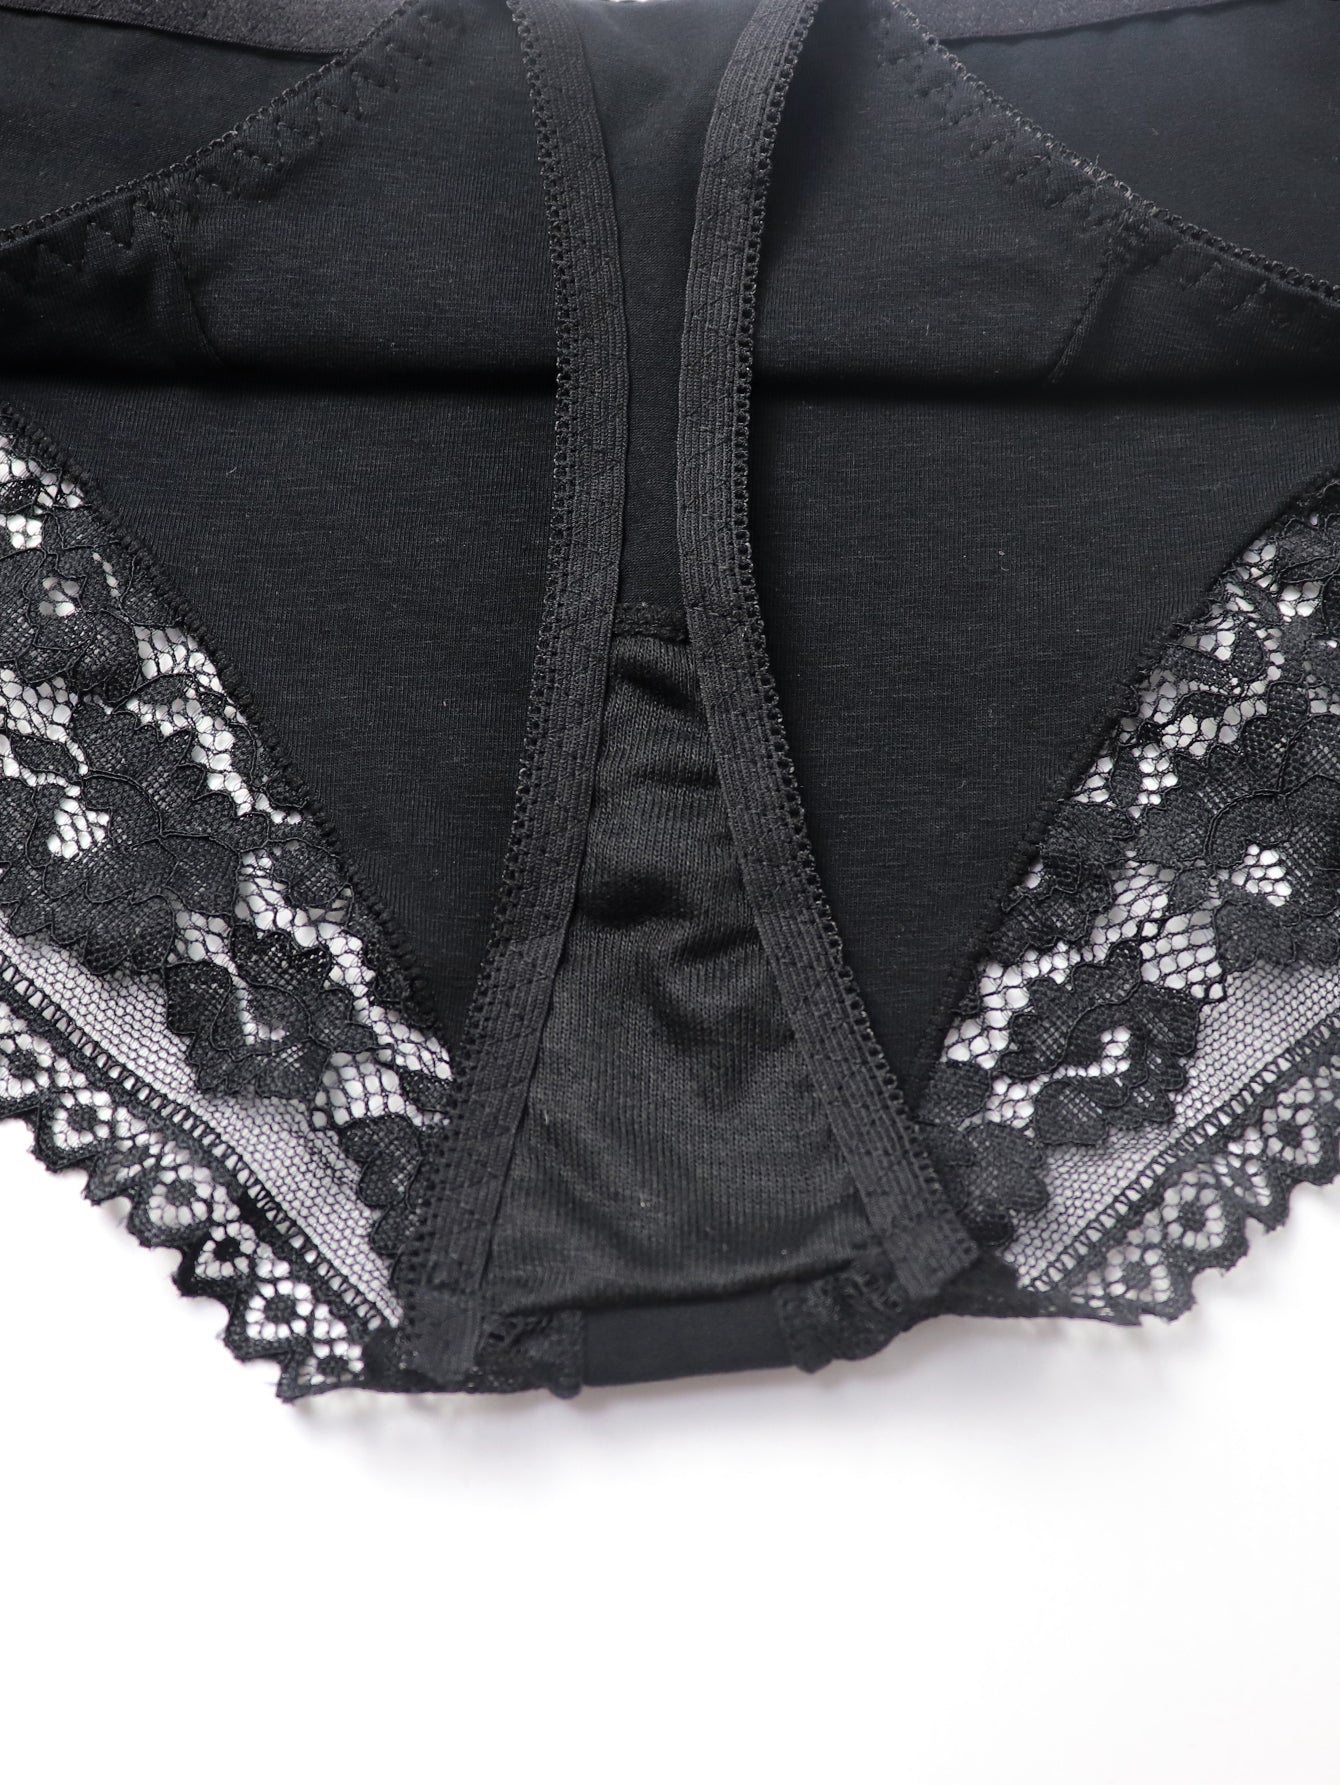 Sexy Bra Set Female Hollow-Out Cotton Embroidery Breathable Lace G-string Cotton Panty Set 38D-48D Sai Feel